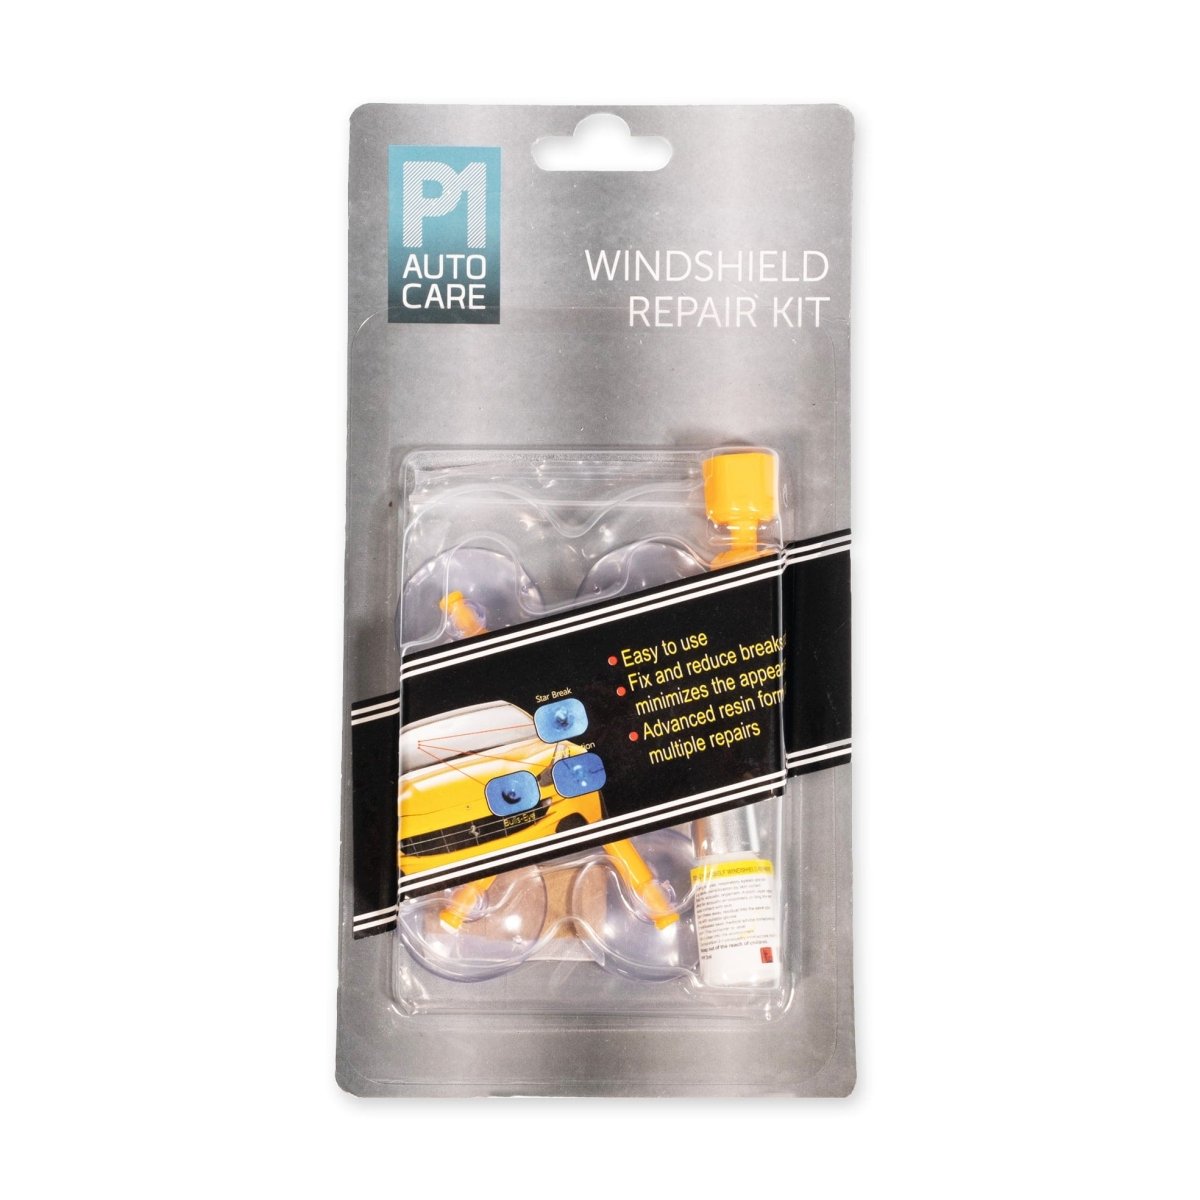 P1 Autocare Windshield Repair Kit - Fix Glass Cracks, Chips, Scratches and More with 1.5g Repair Resin - Green Flag Shop